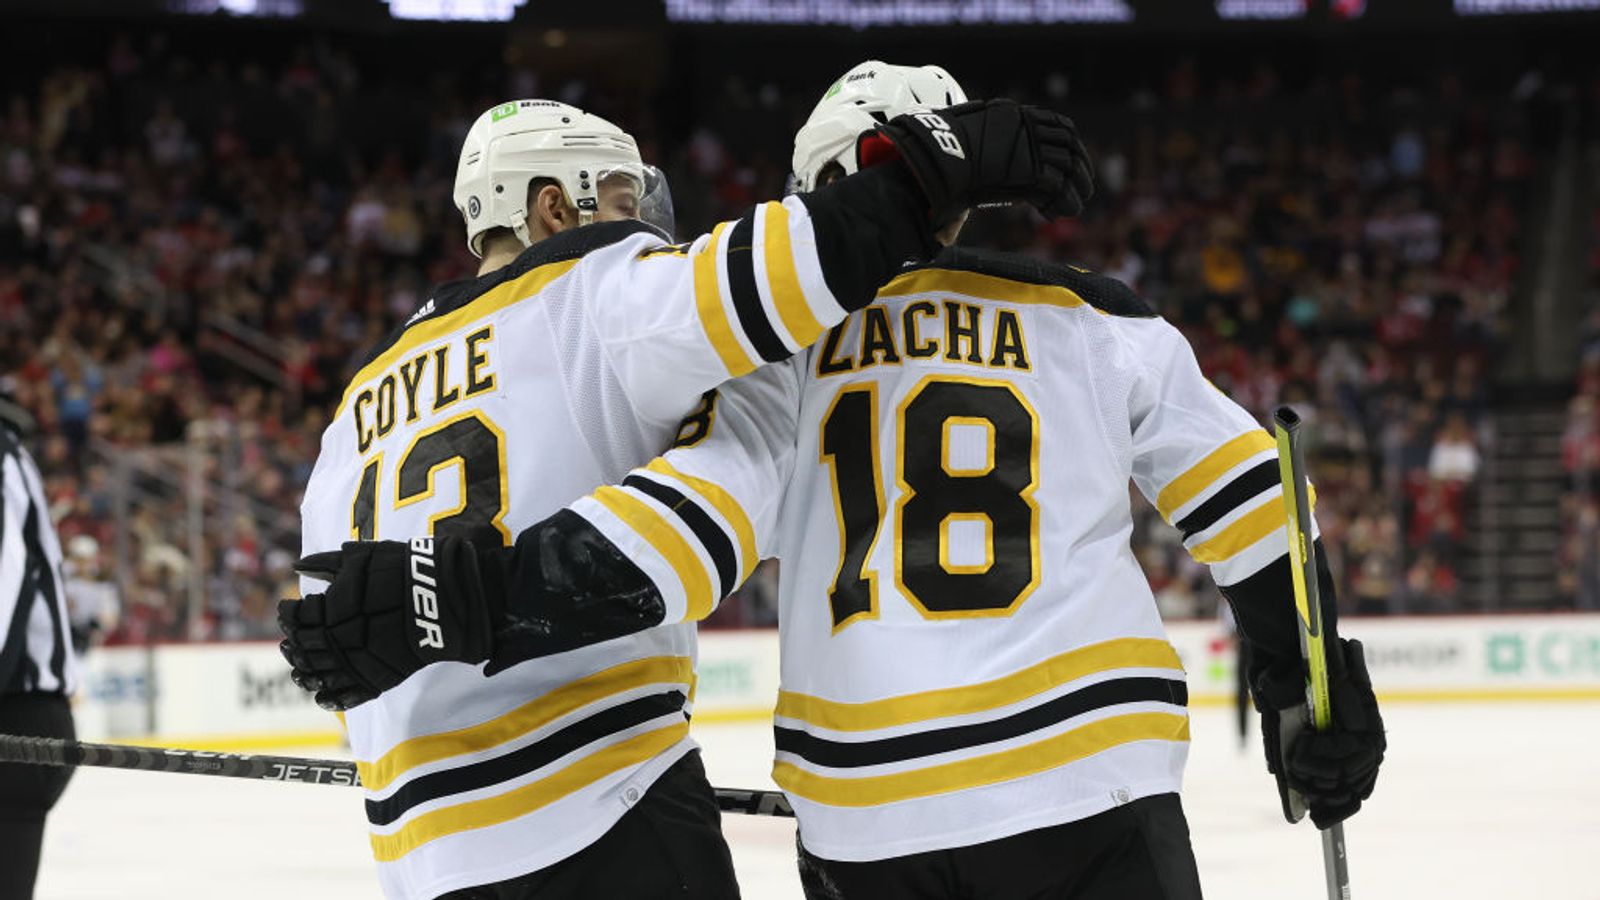 Patrice Bergeron is officially the next captain of the Bruins